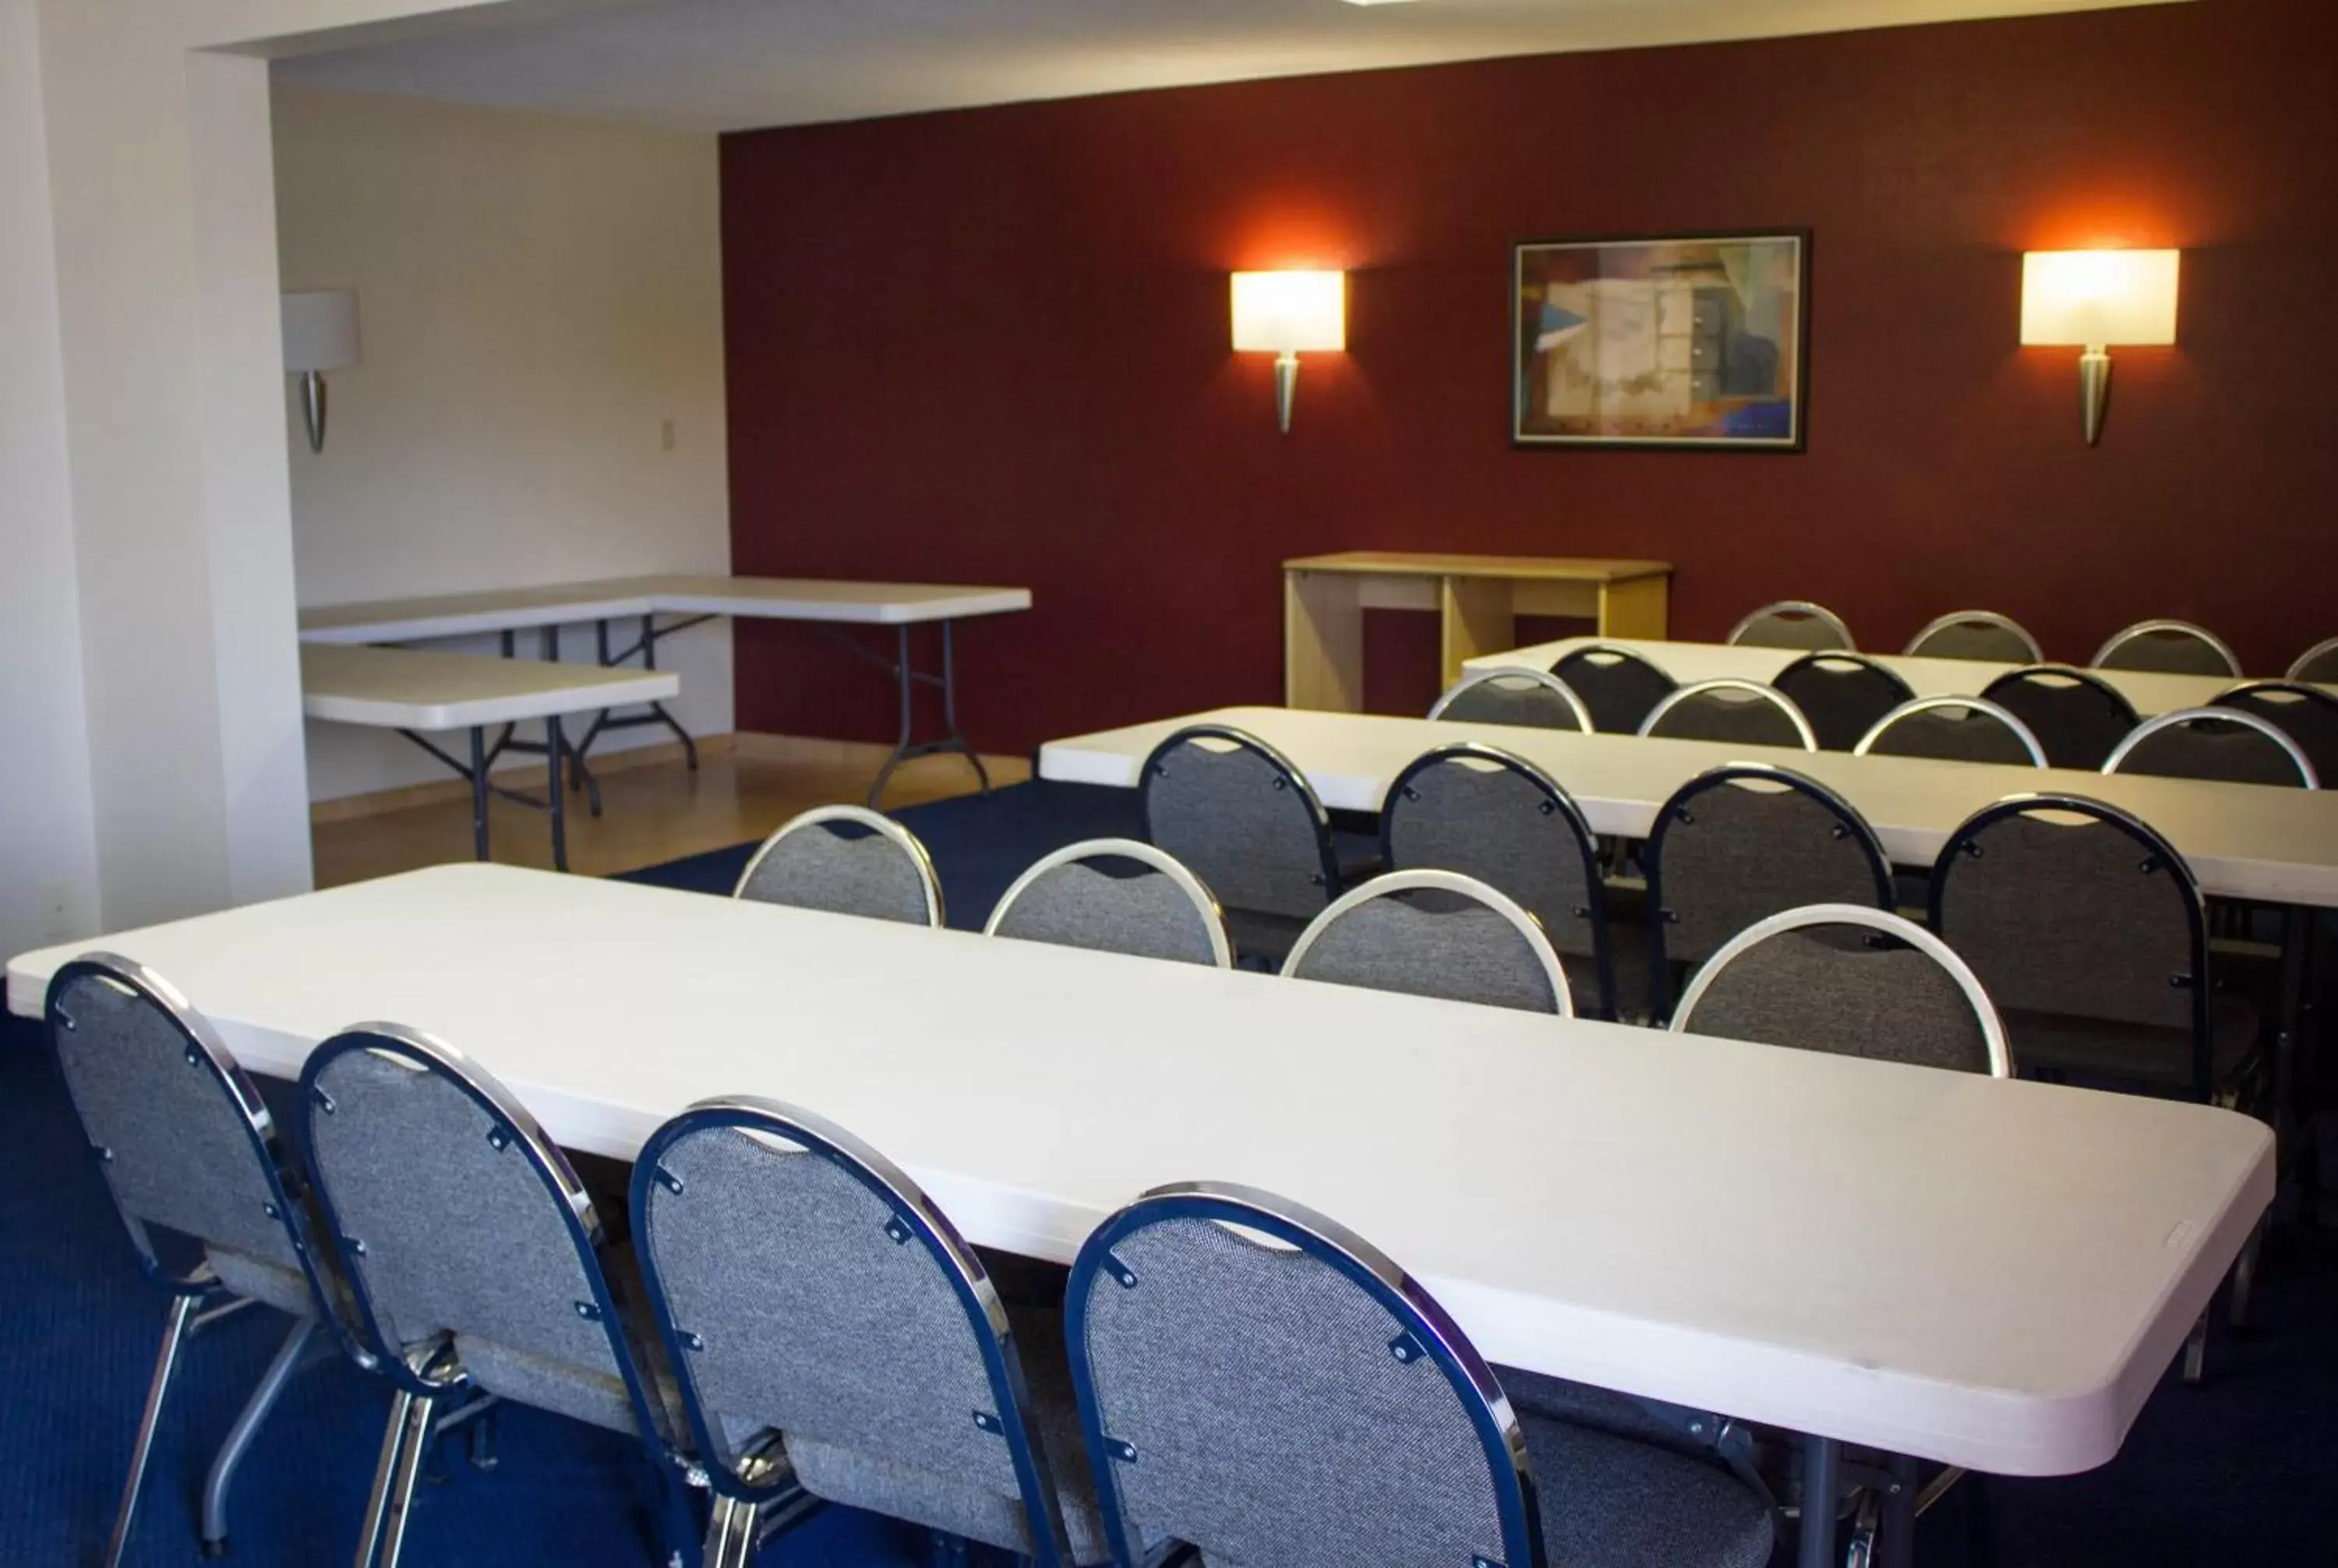 Meeting/conference room in Red Roof Inn Somerset, KY